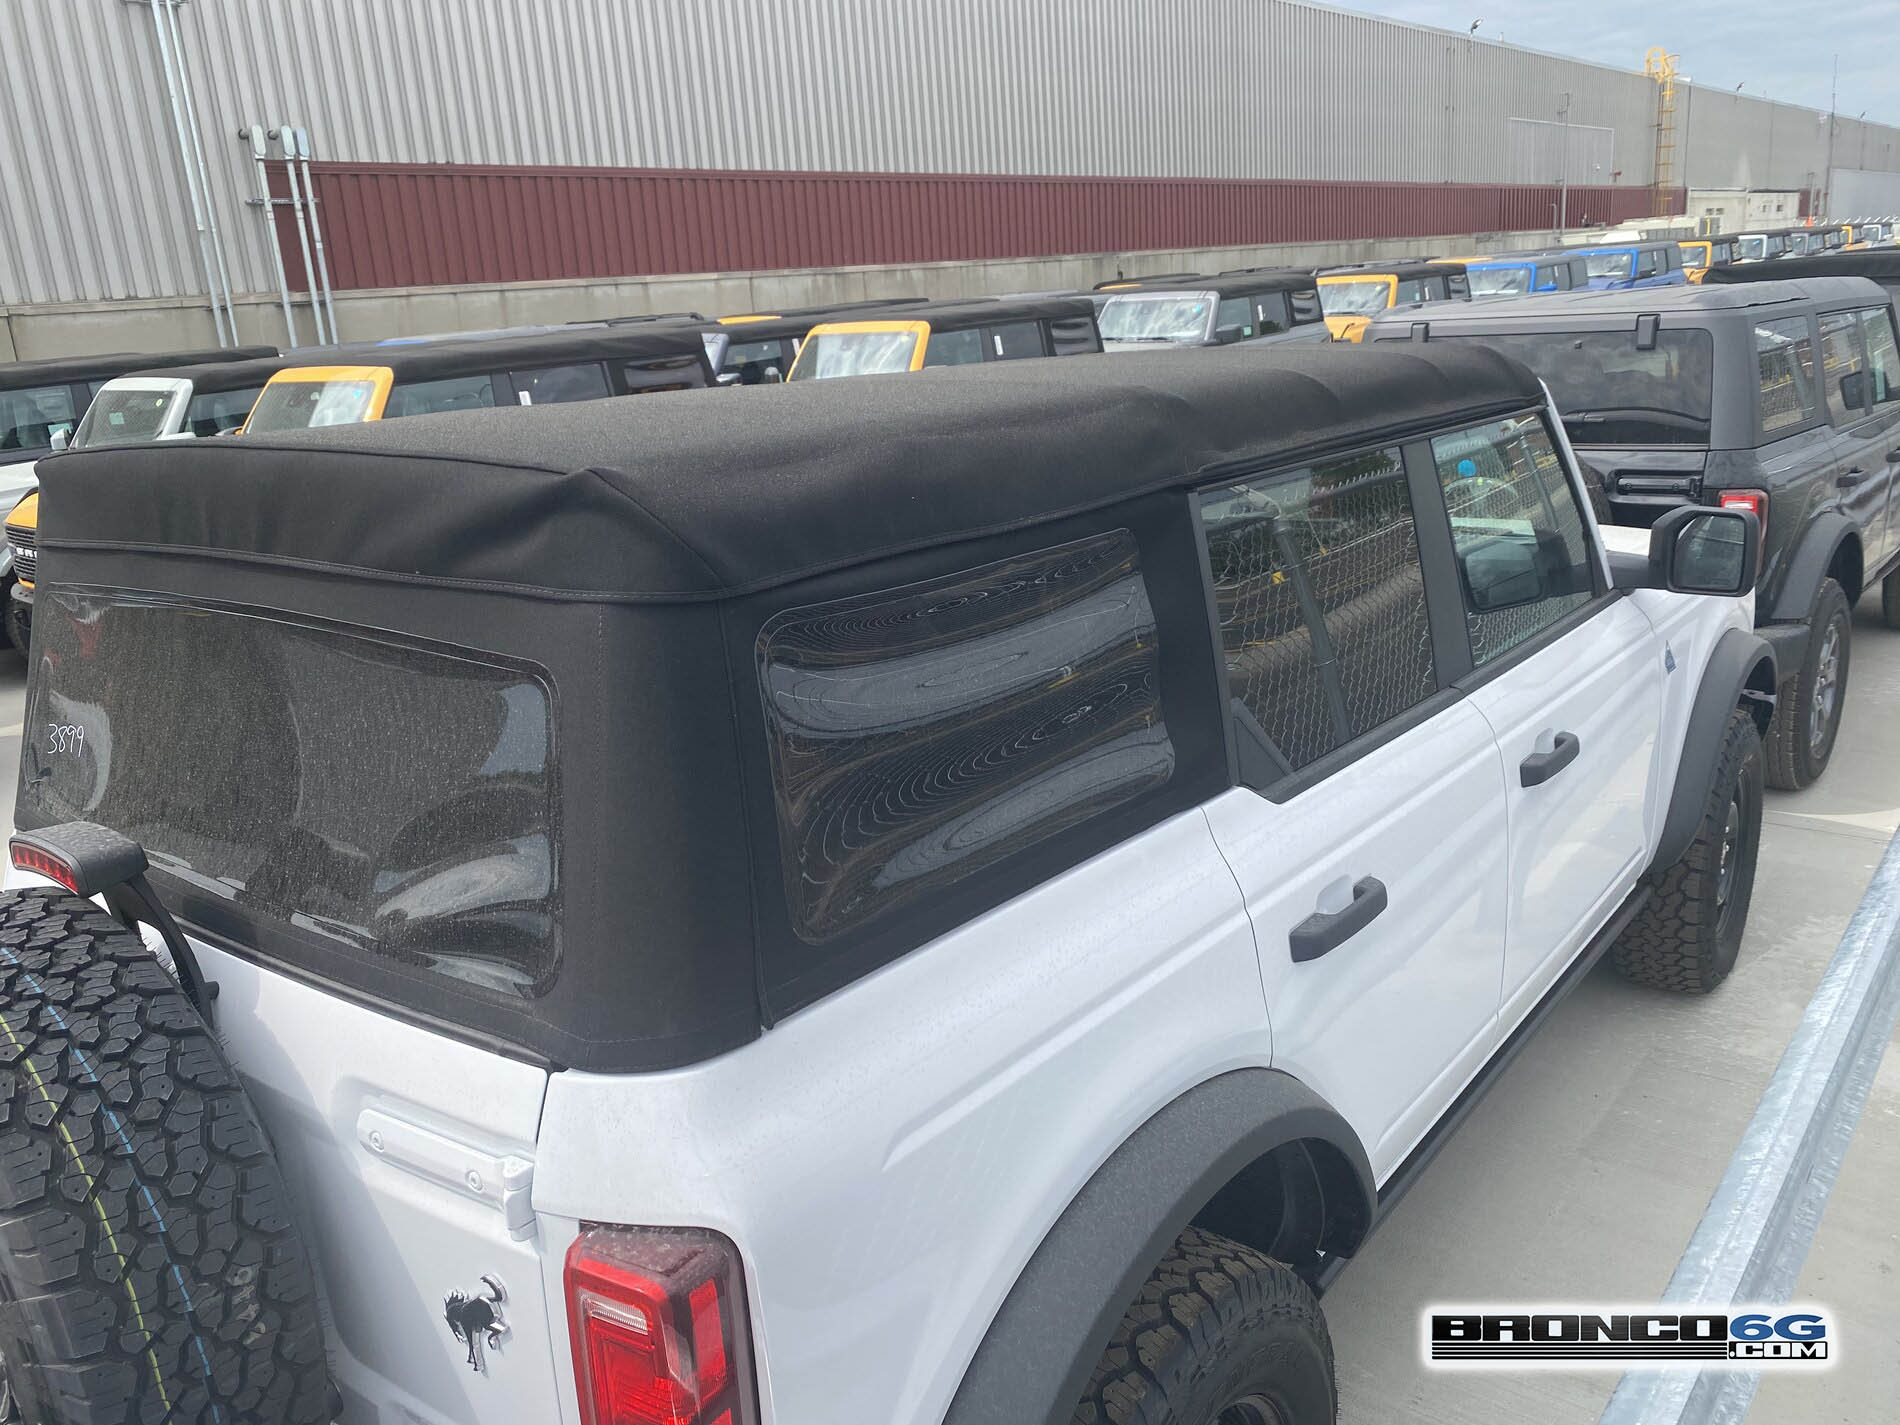 Ford Bronco Pics of 2021 Broncos in MAP holding yard area. Any requests for pictures? 2021-broncos-holding-area-map-plant-factory-25-